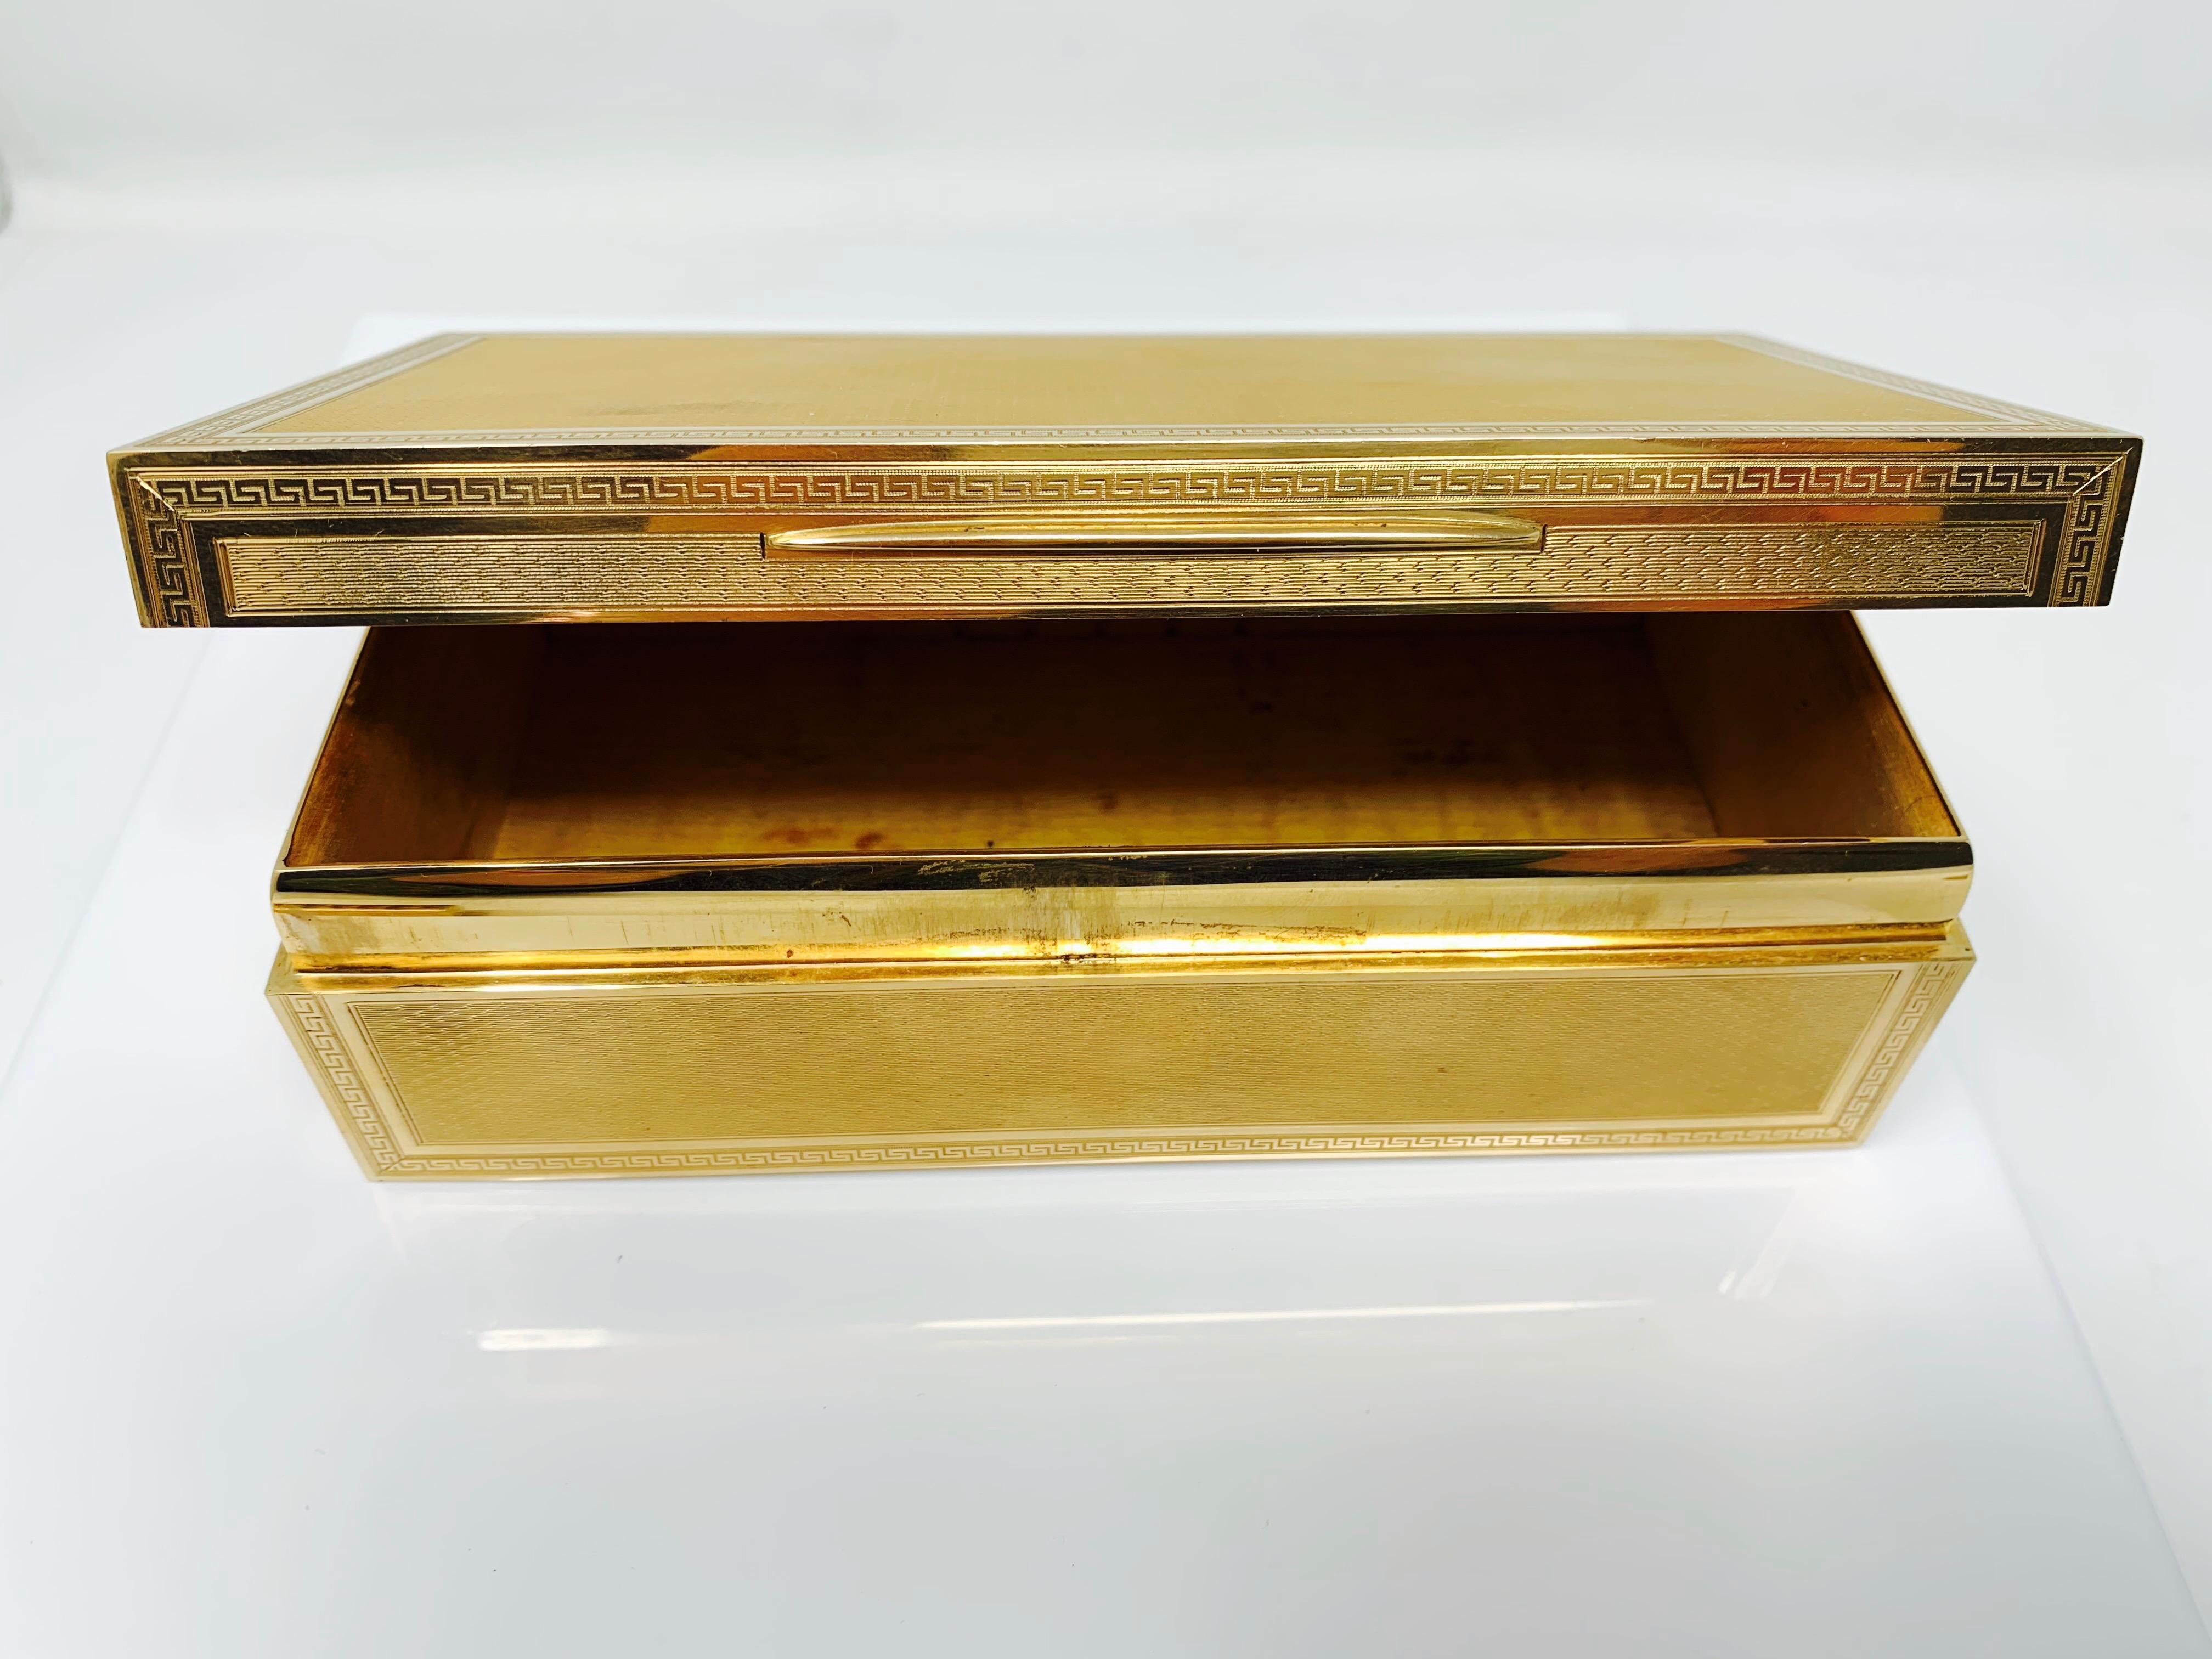 Tiffany & Co. Yellow Gold Jewelry Box In Excellent Condition For Sale In New York, NY